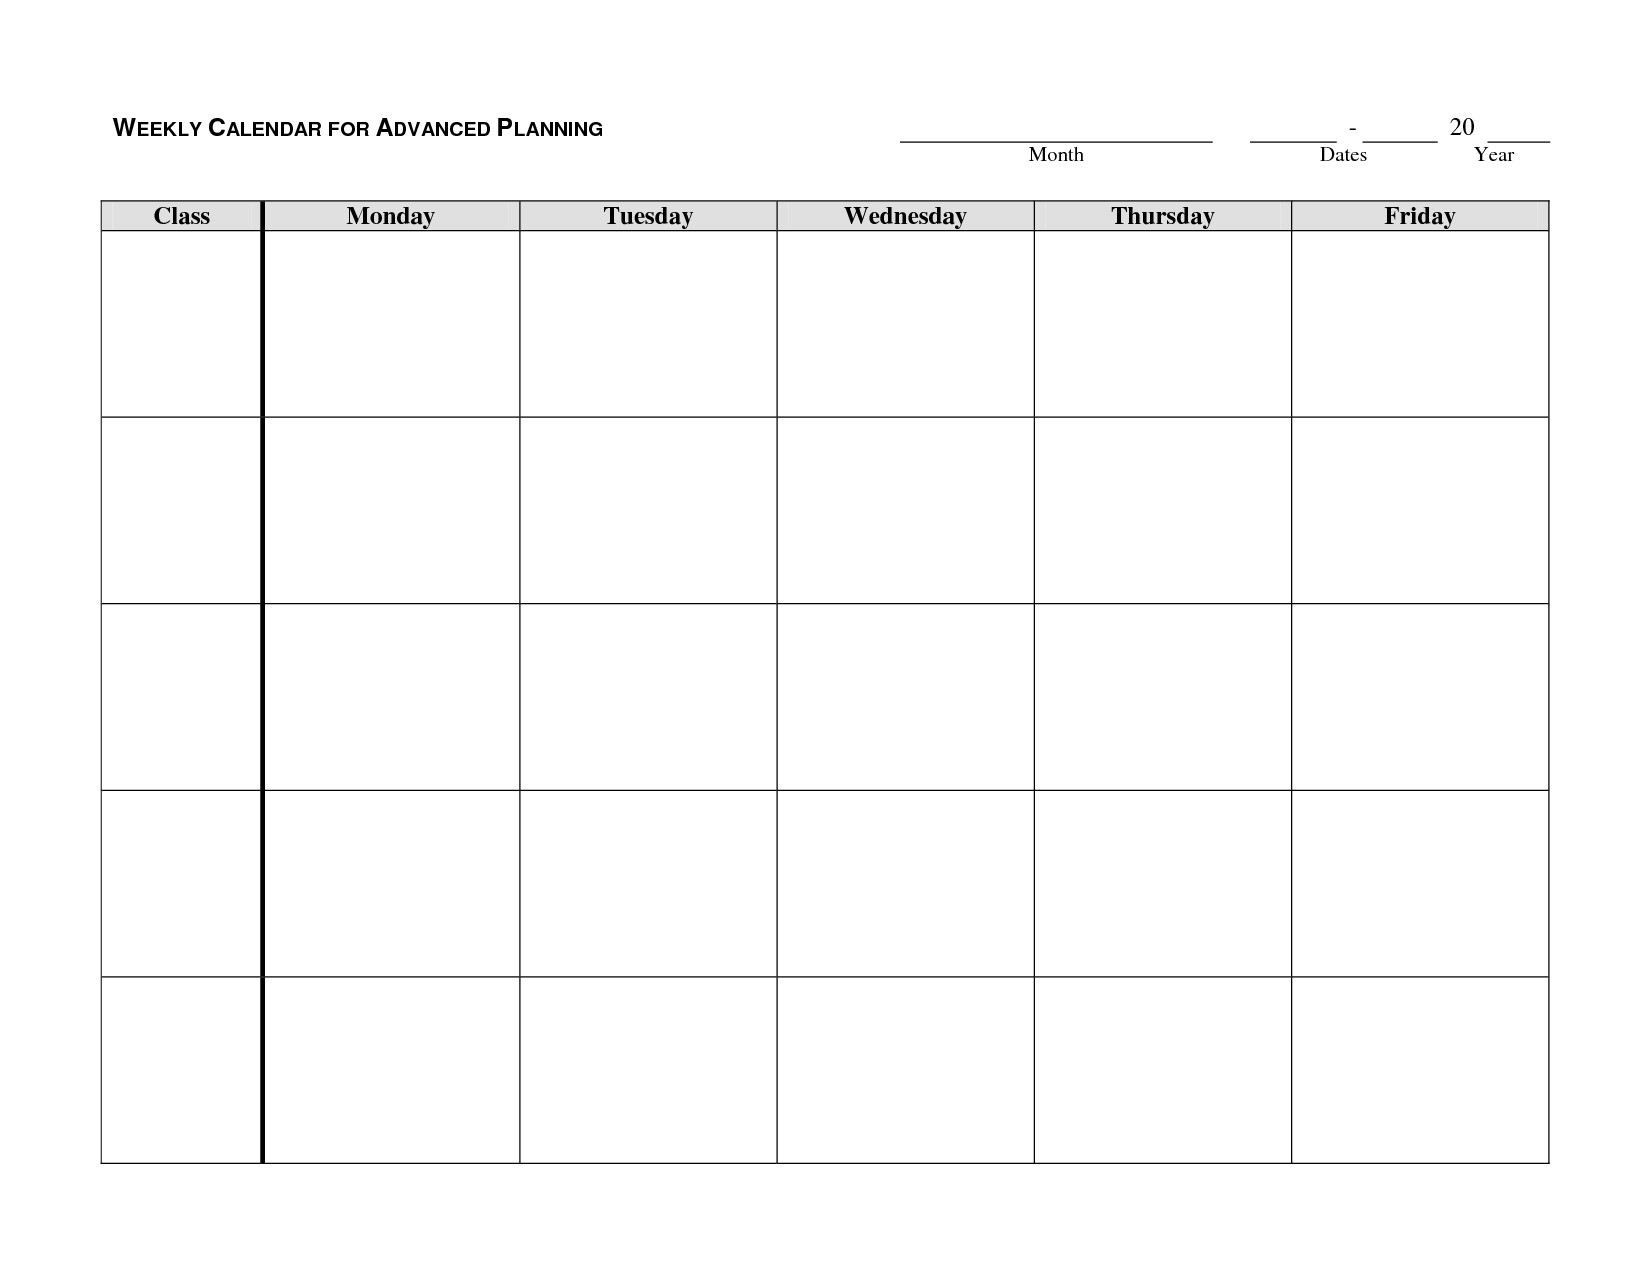 Monday To Friday Schedule Printable | Template Calendar Printable for Monday To Friday Schedule Printable